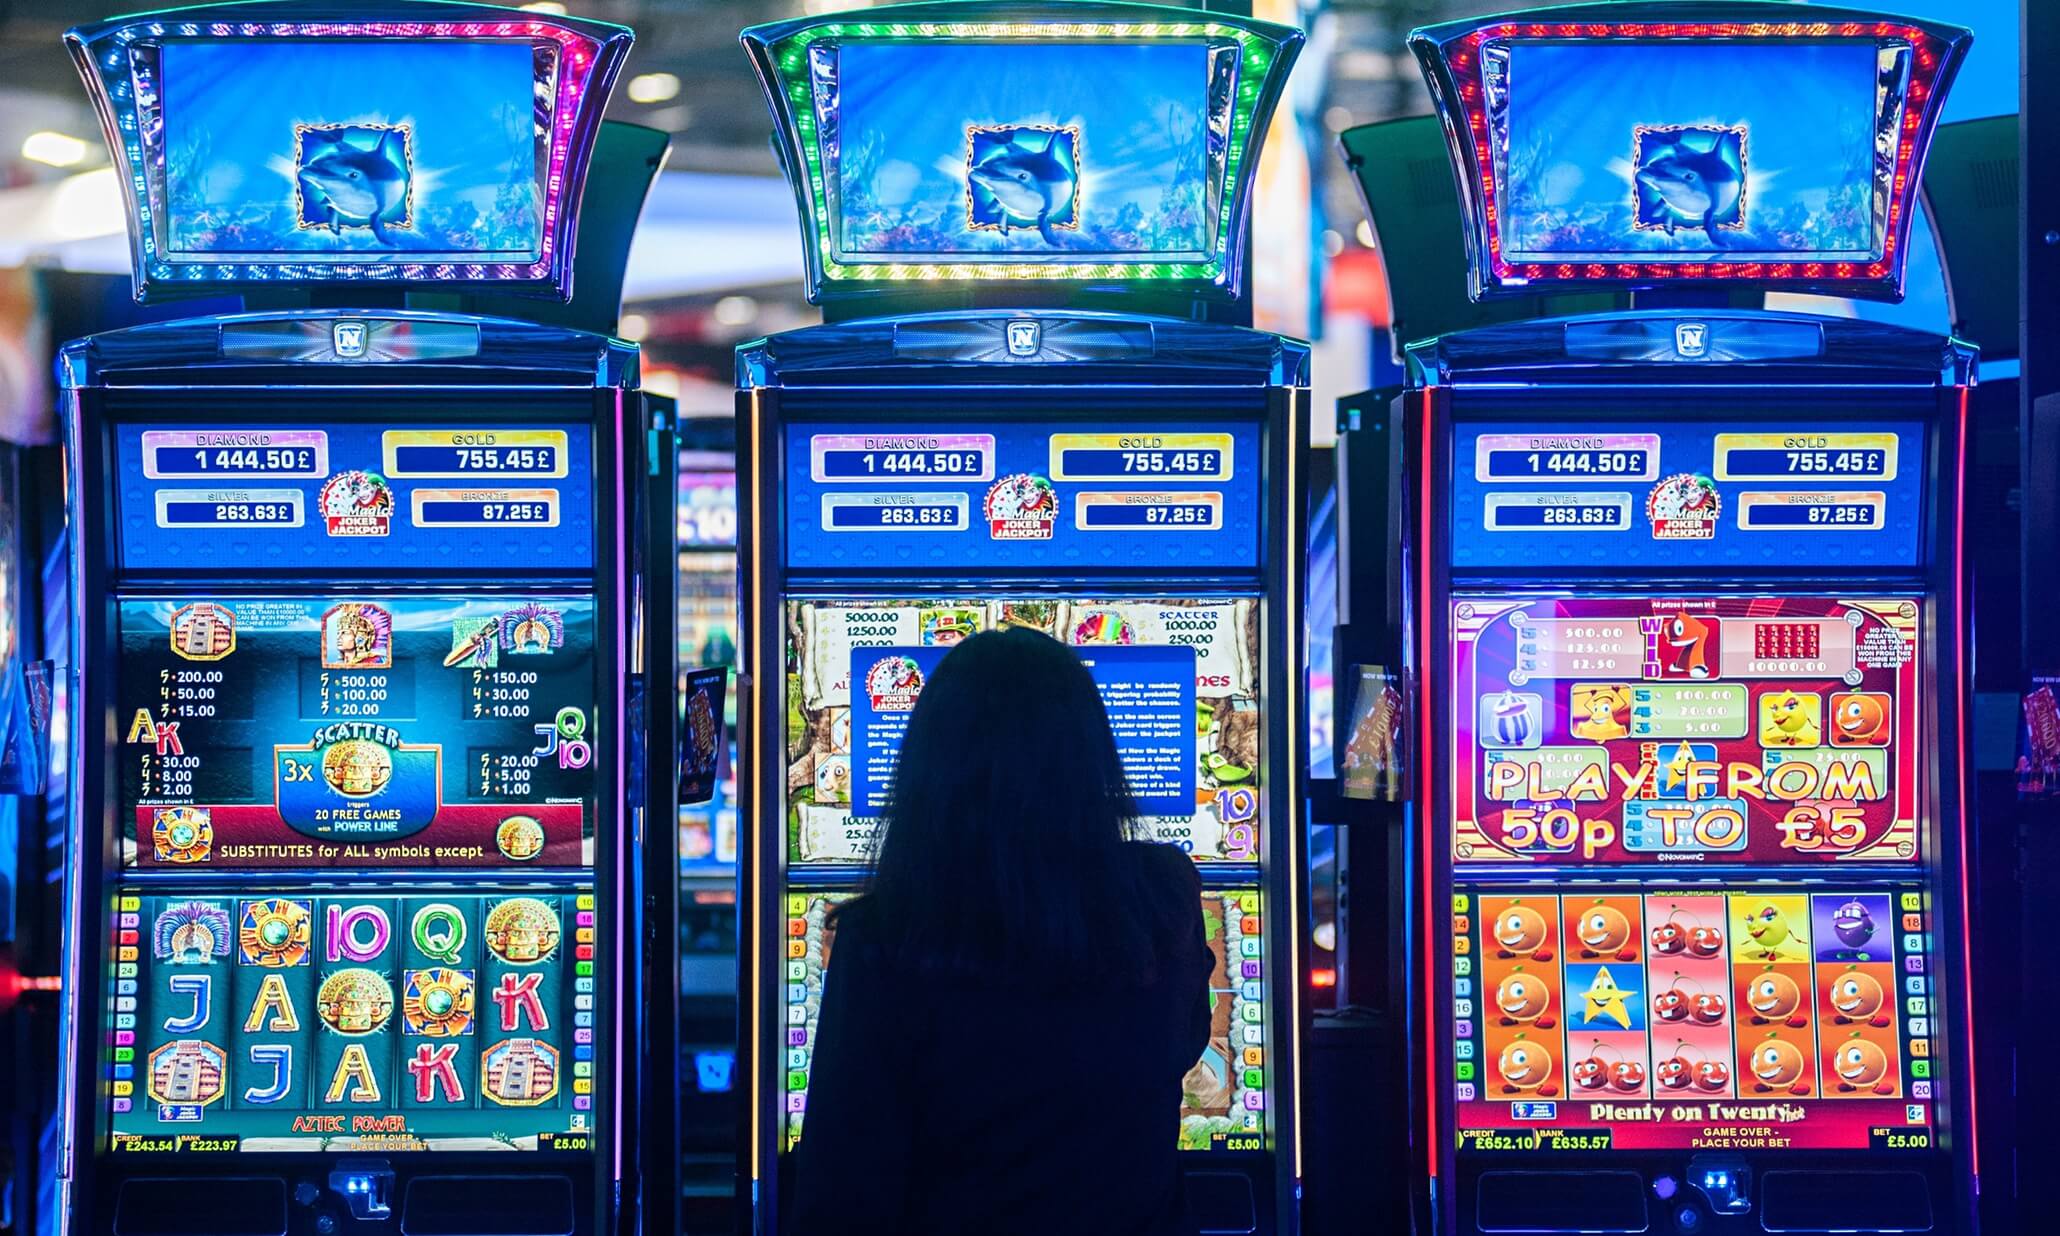 Grupo slots now offering Gig-powered products